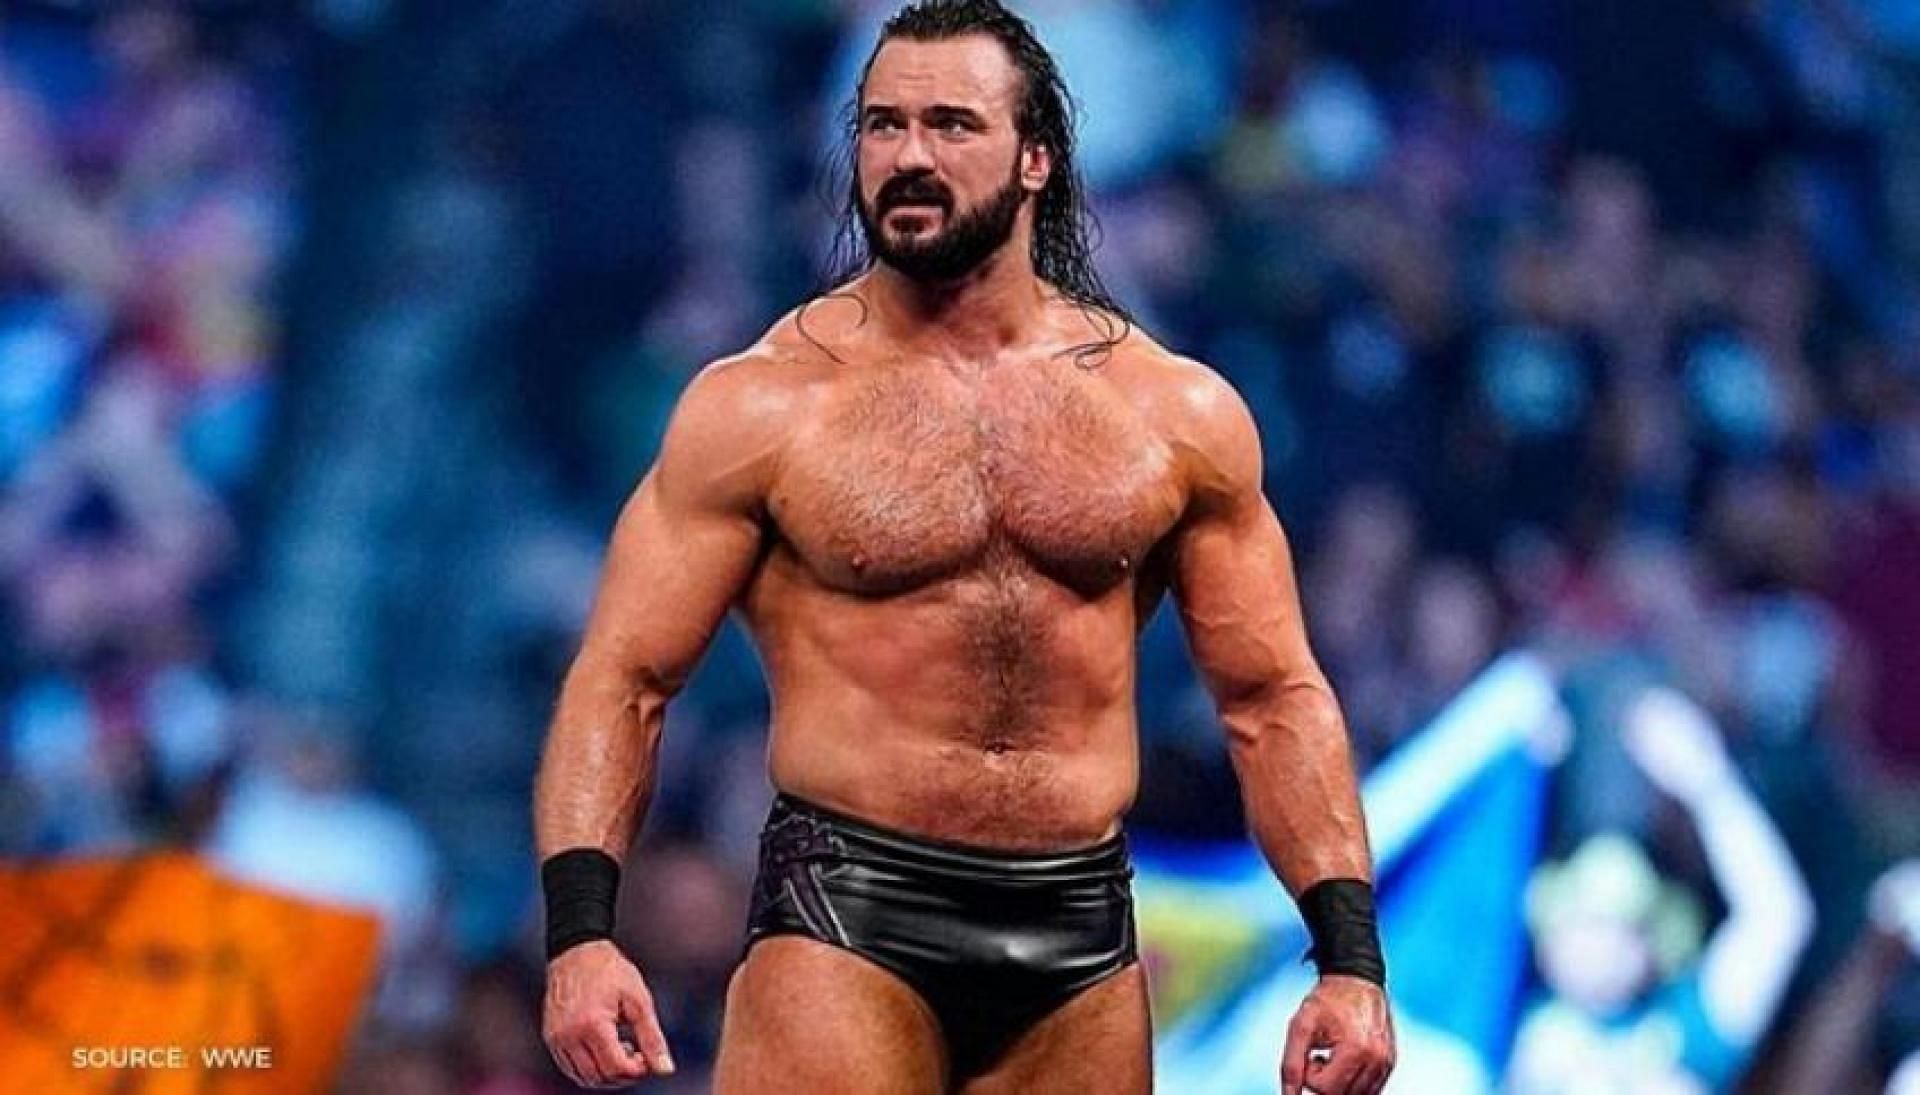 McIntyre could be in line for a big match at WrestleMania 39